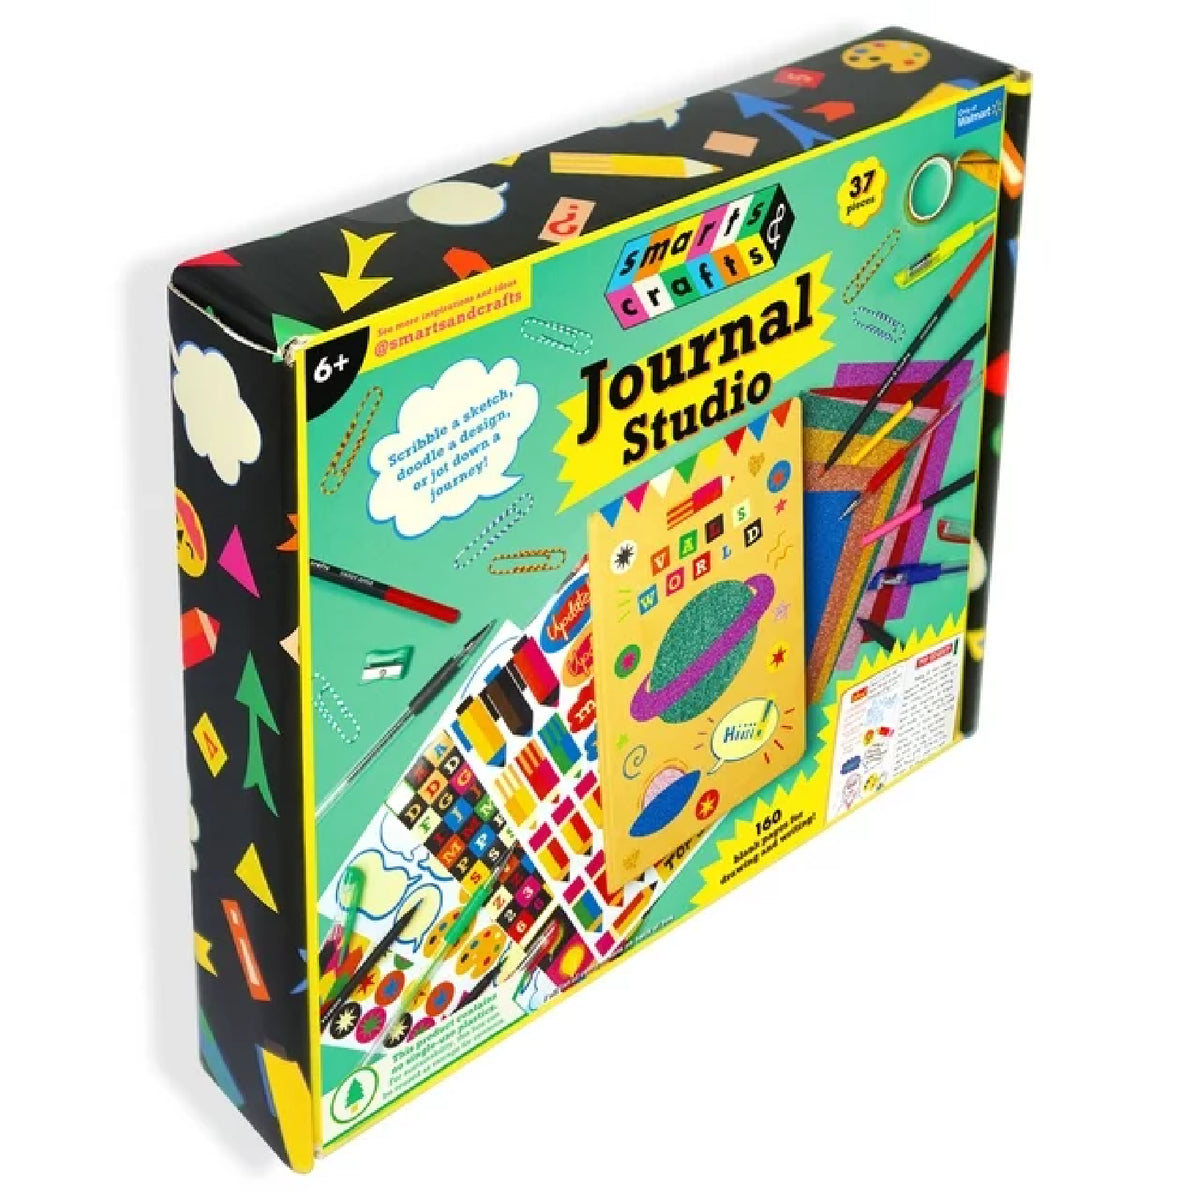 Art 101 59096 Budding Artist Multifunctional Set in Wood Art Case with 96 Pieces for Children